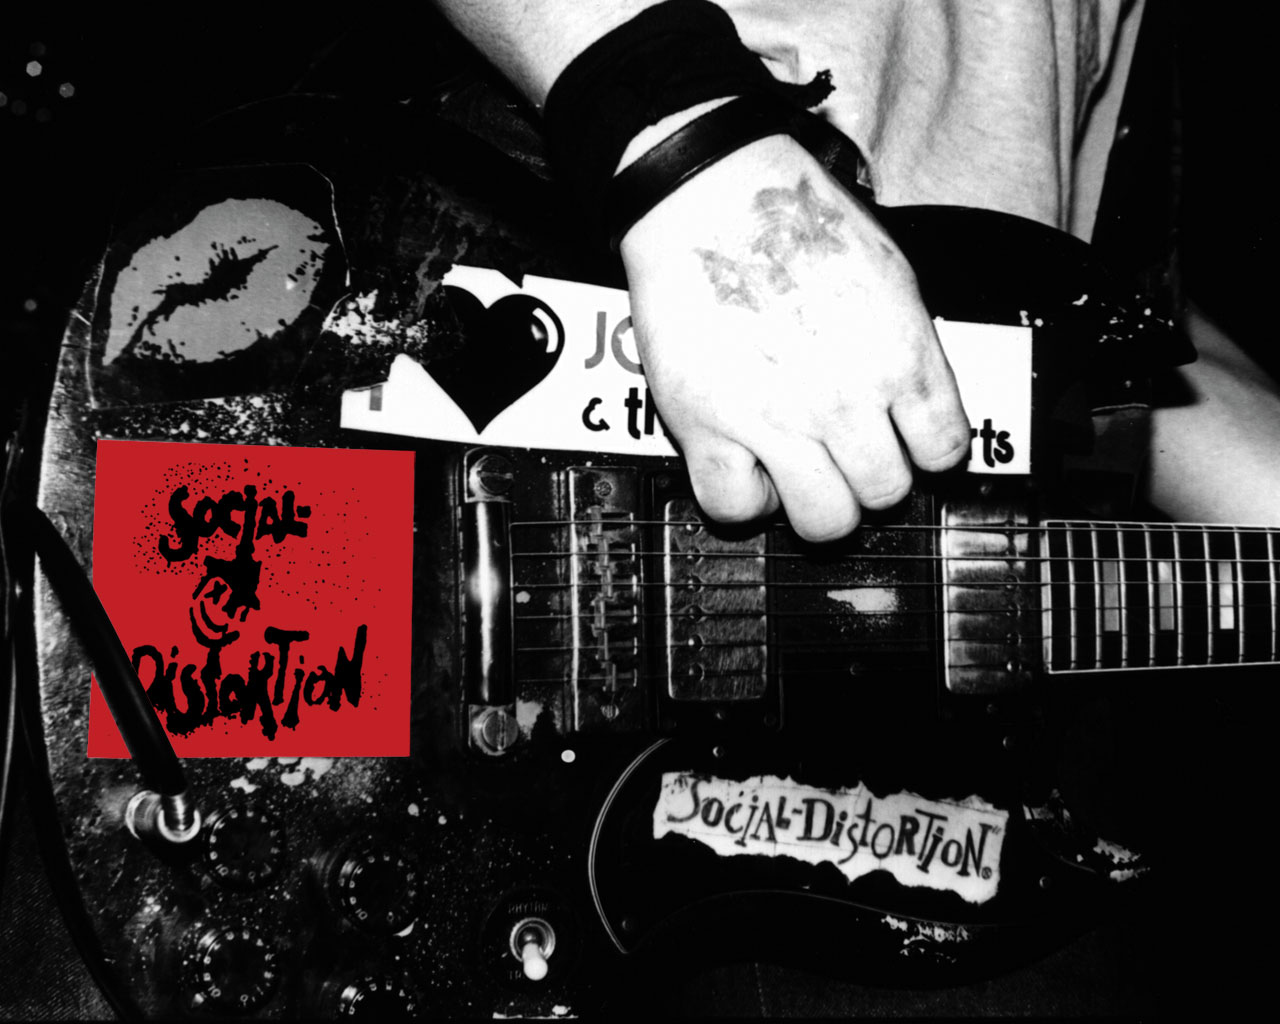 social distortion wallpaper,font,music,black and white,photography,musician